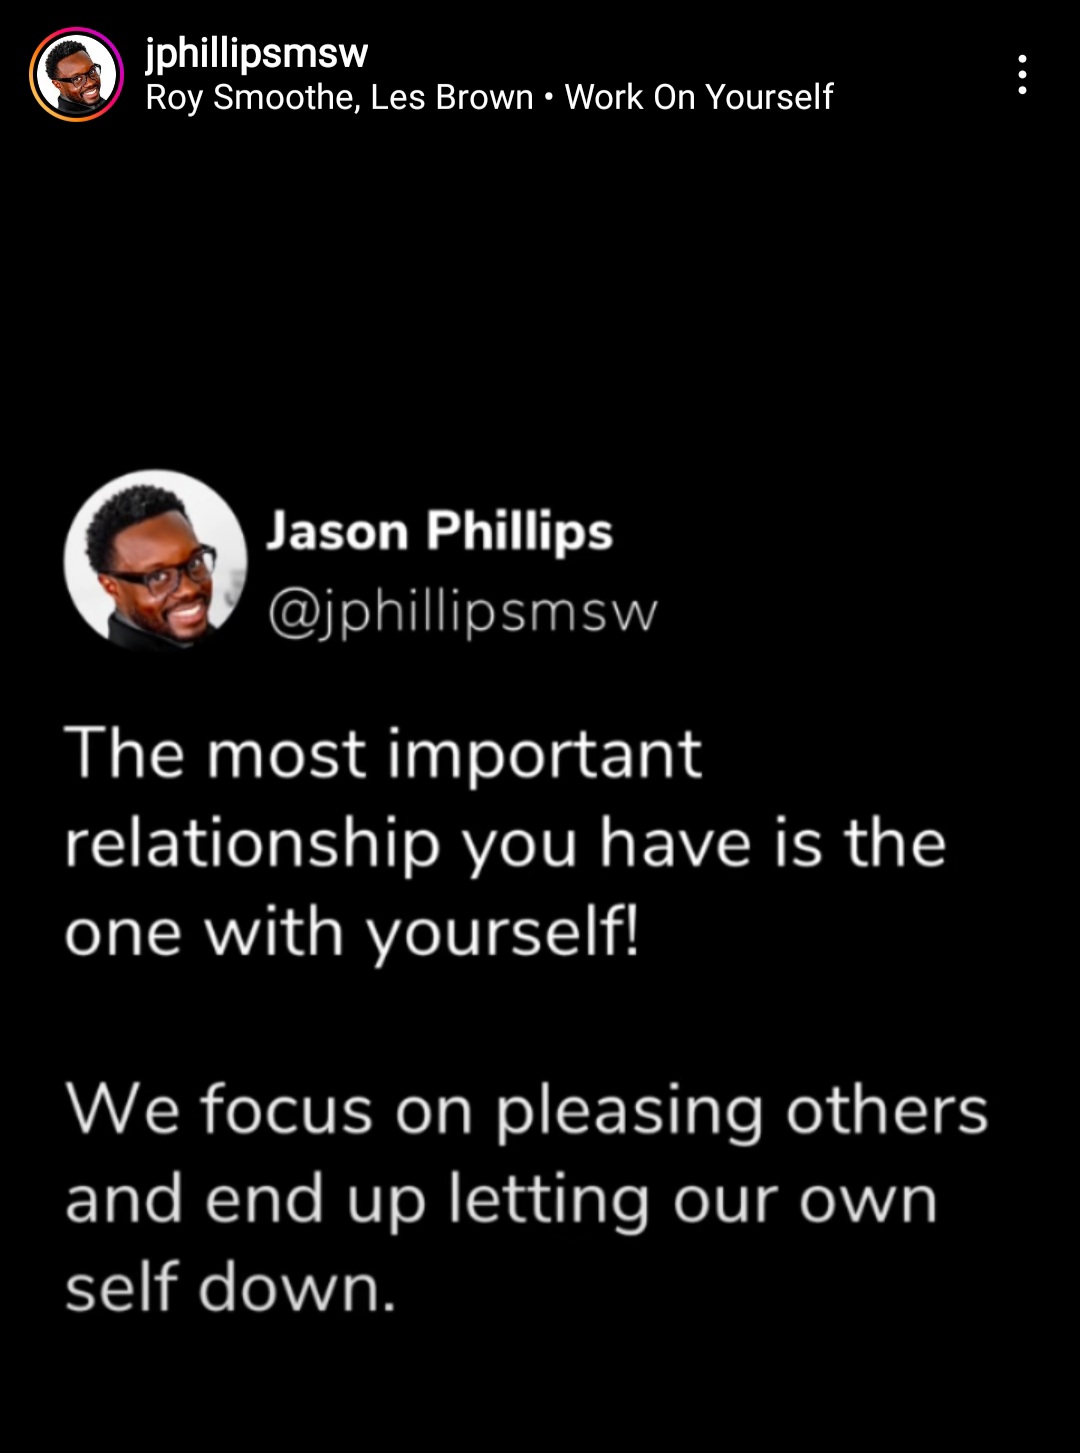 The most important relationship you have is the one with yourself! We focus on pleasing others and end up letting our own self down. Jason Phillips, coaching tip